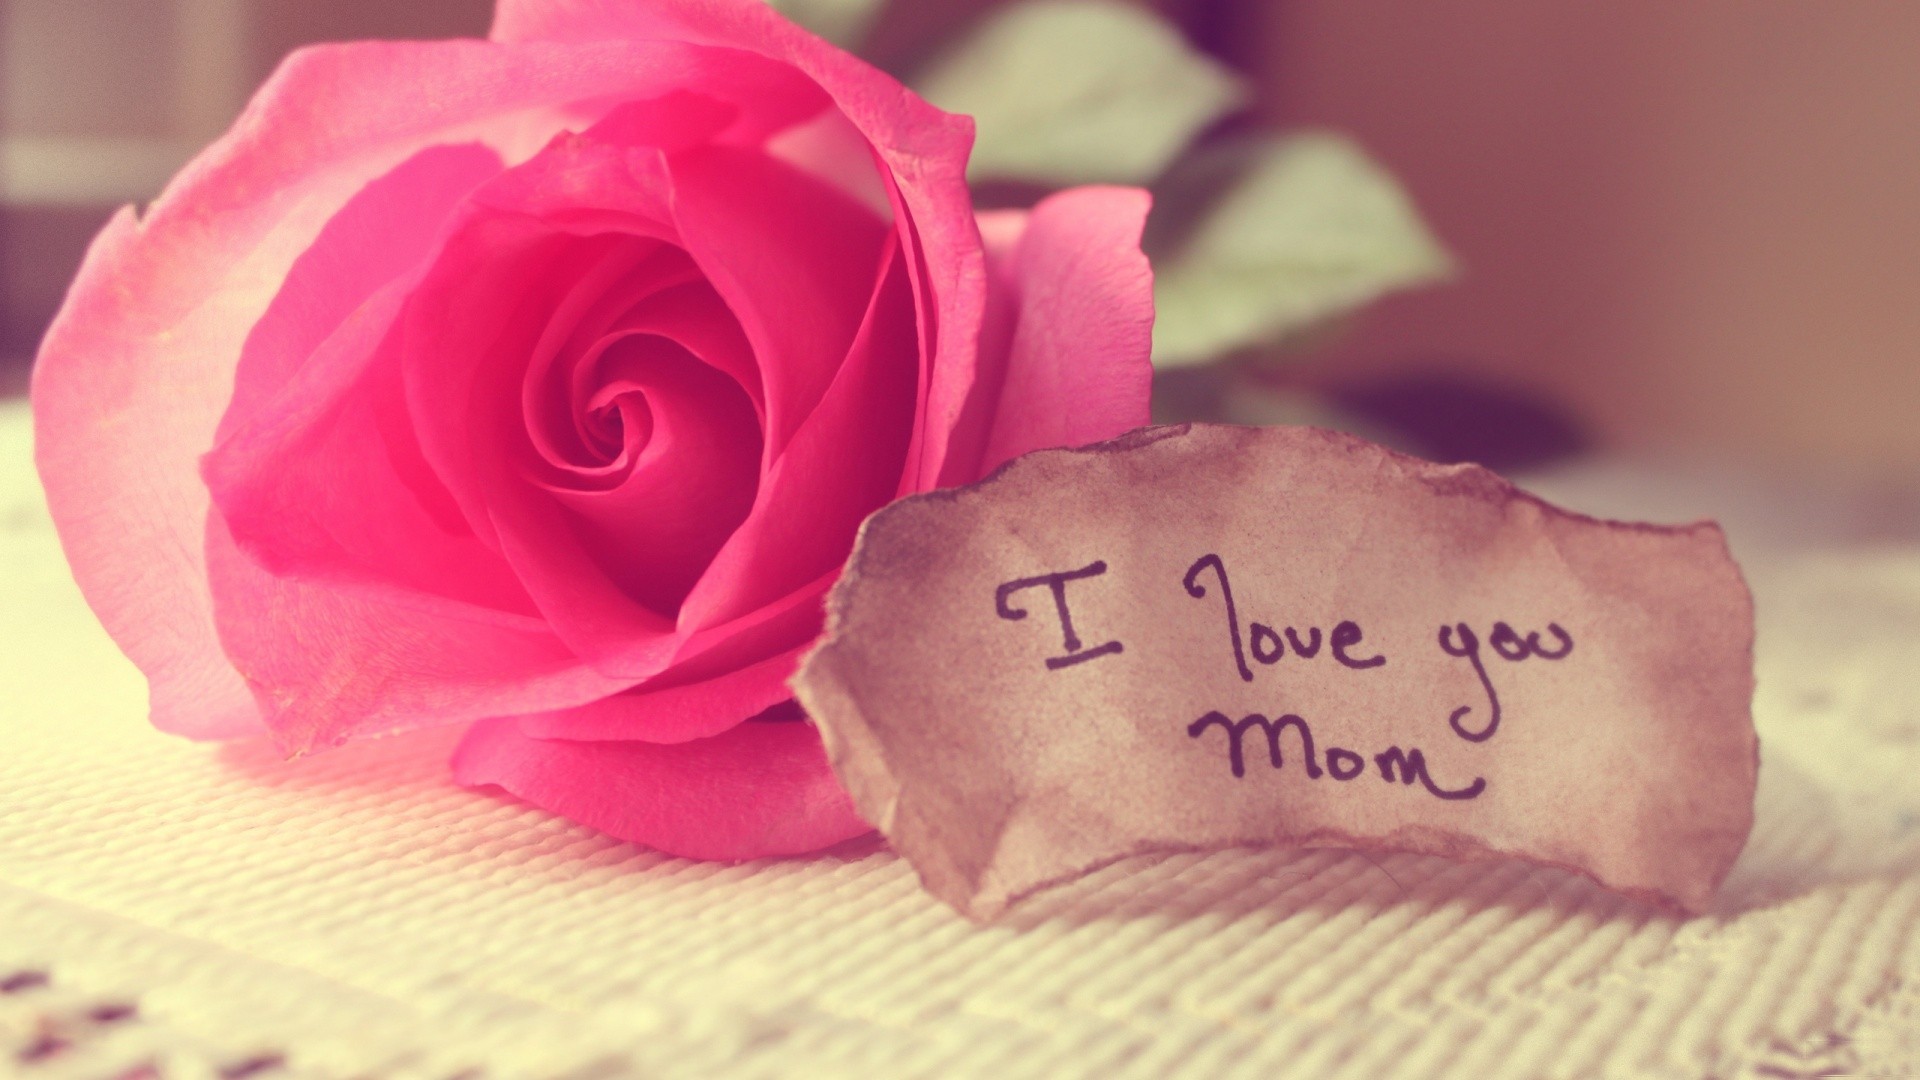 I Love You Mom Wallpapers HD Wallpaper